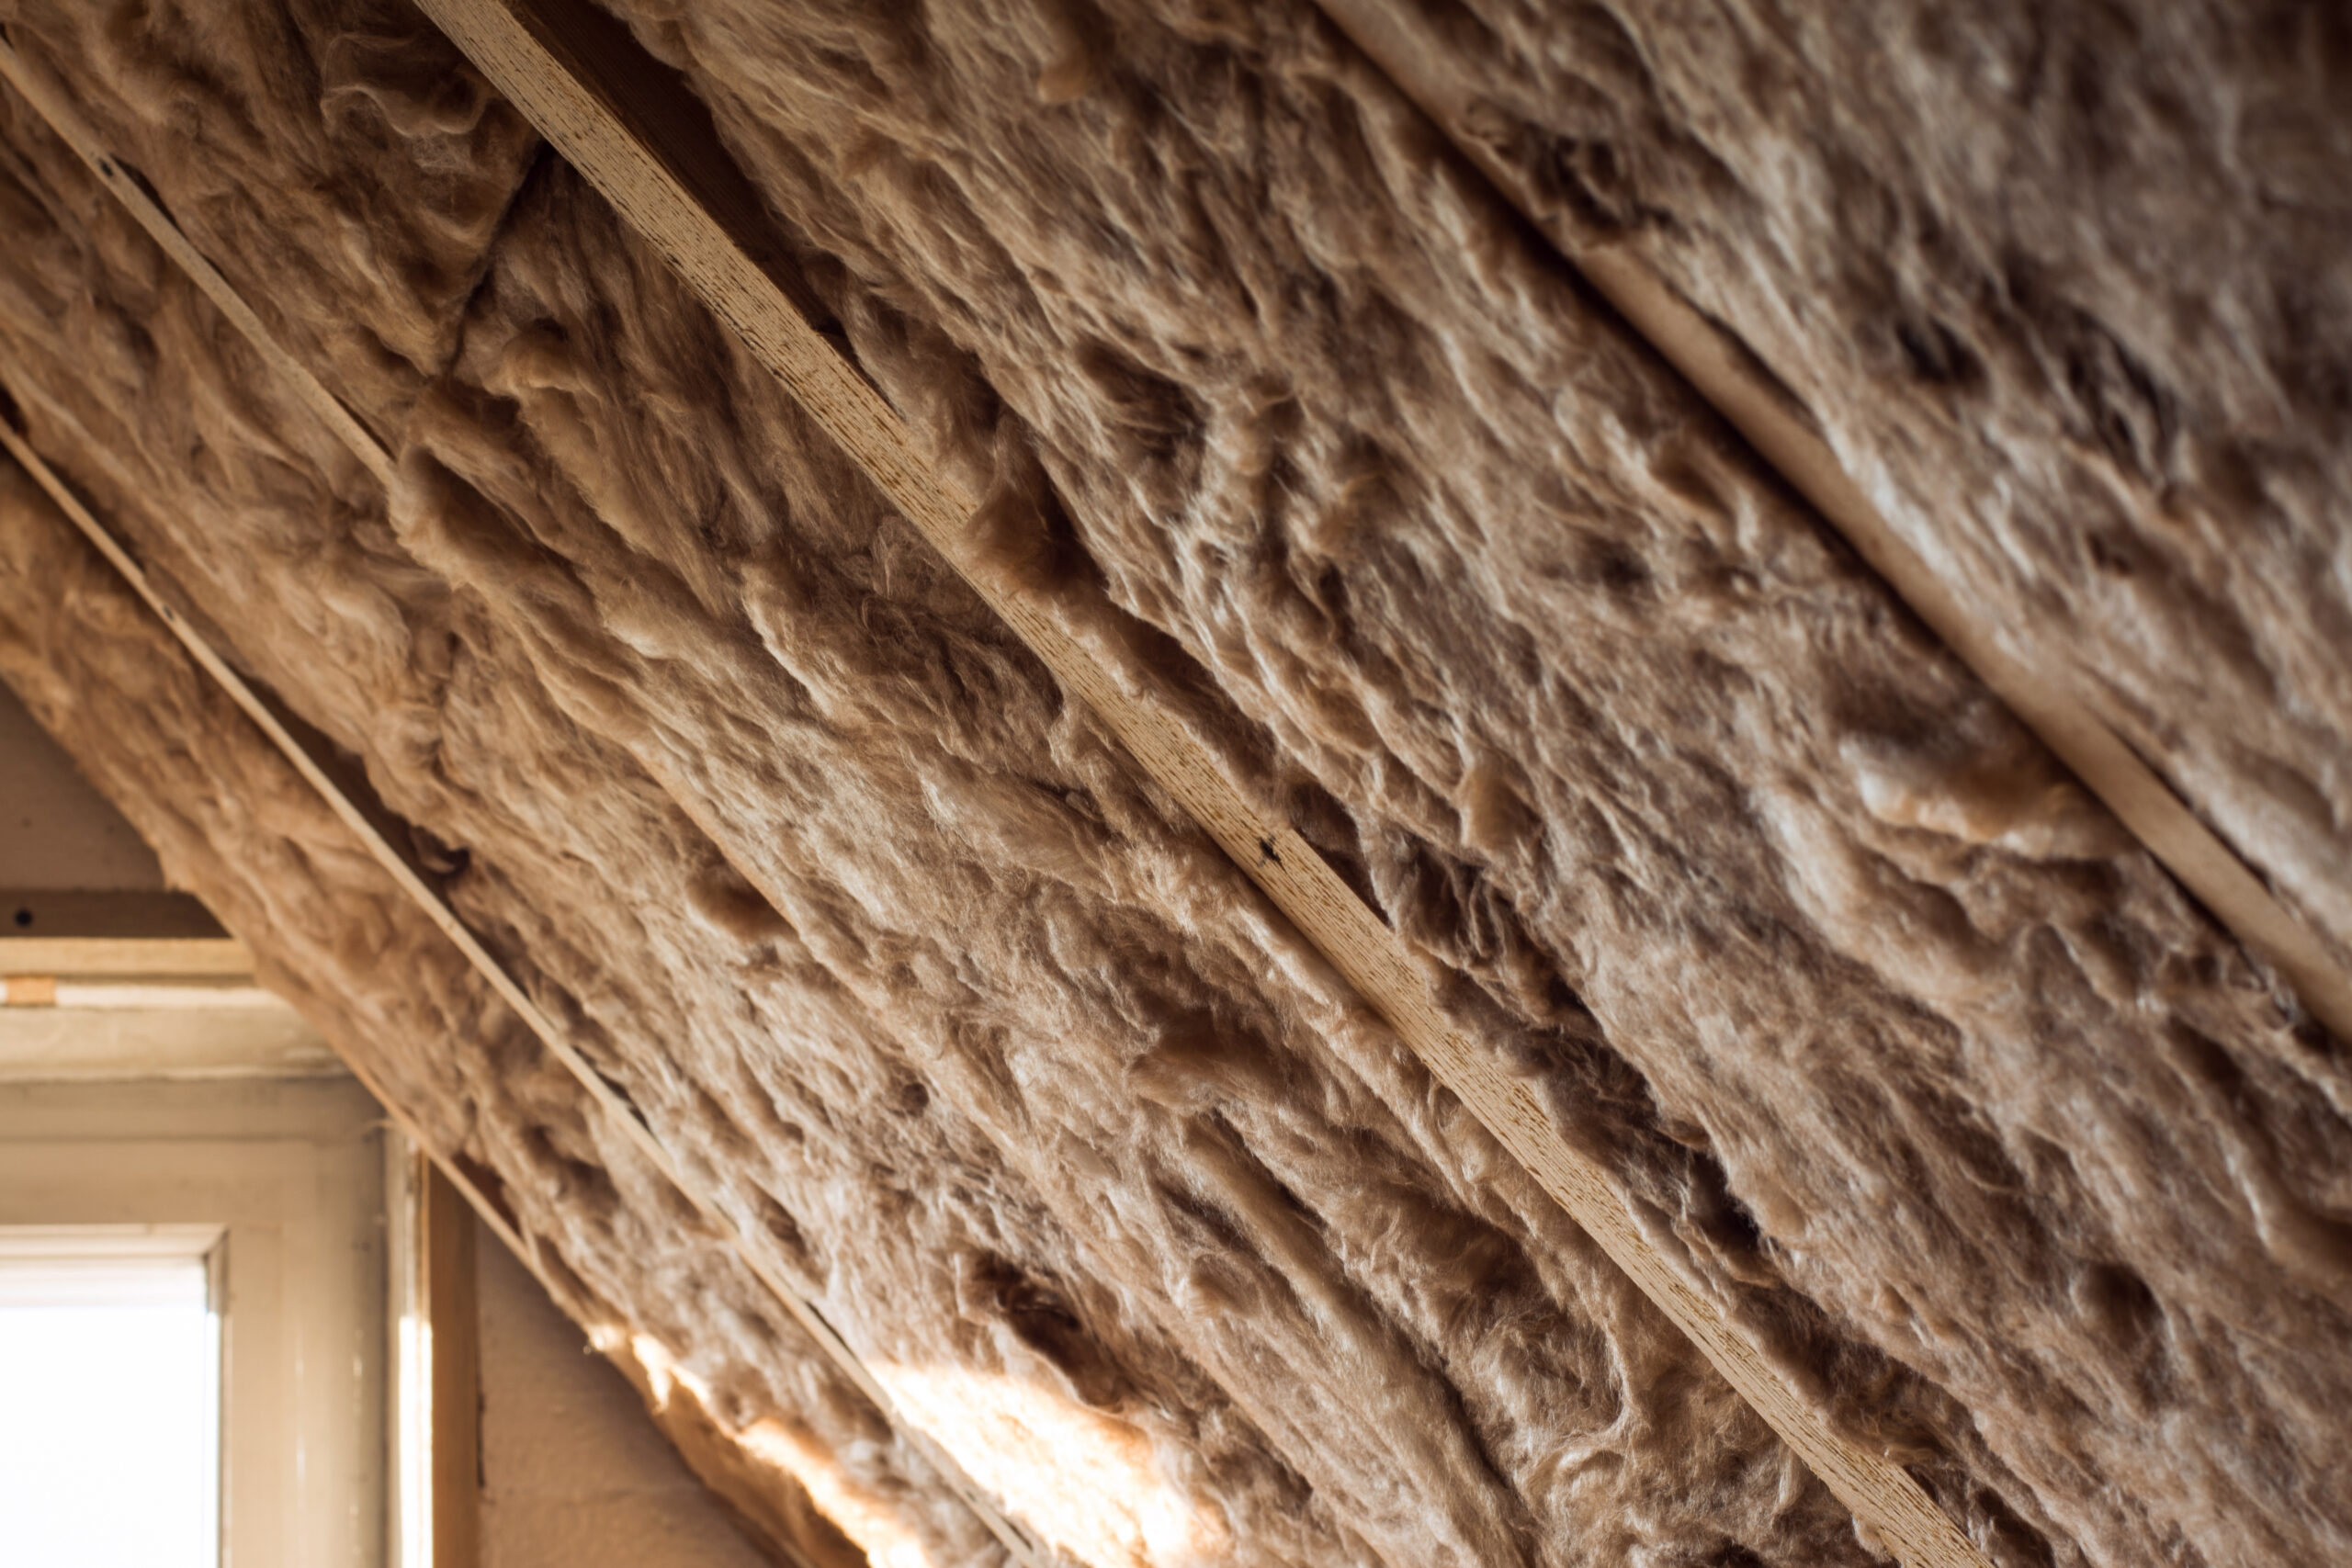 Glass wool and styrofoam insulation in a wooden frame on a inclined attic wall near a window